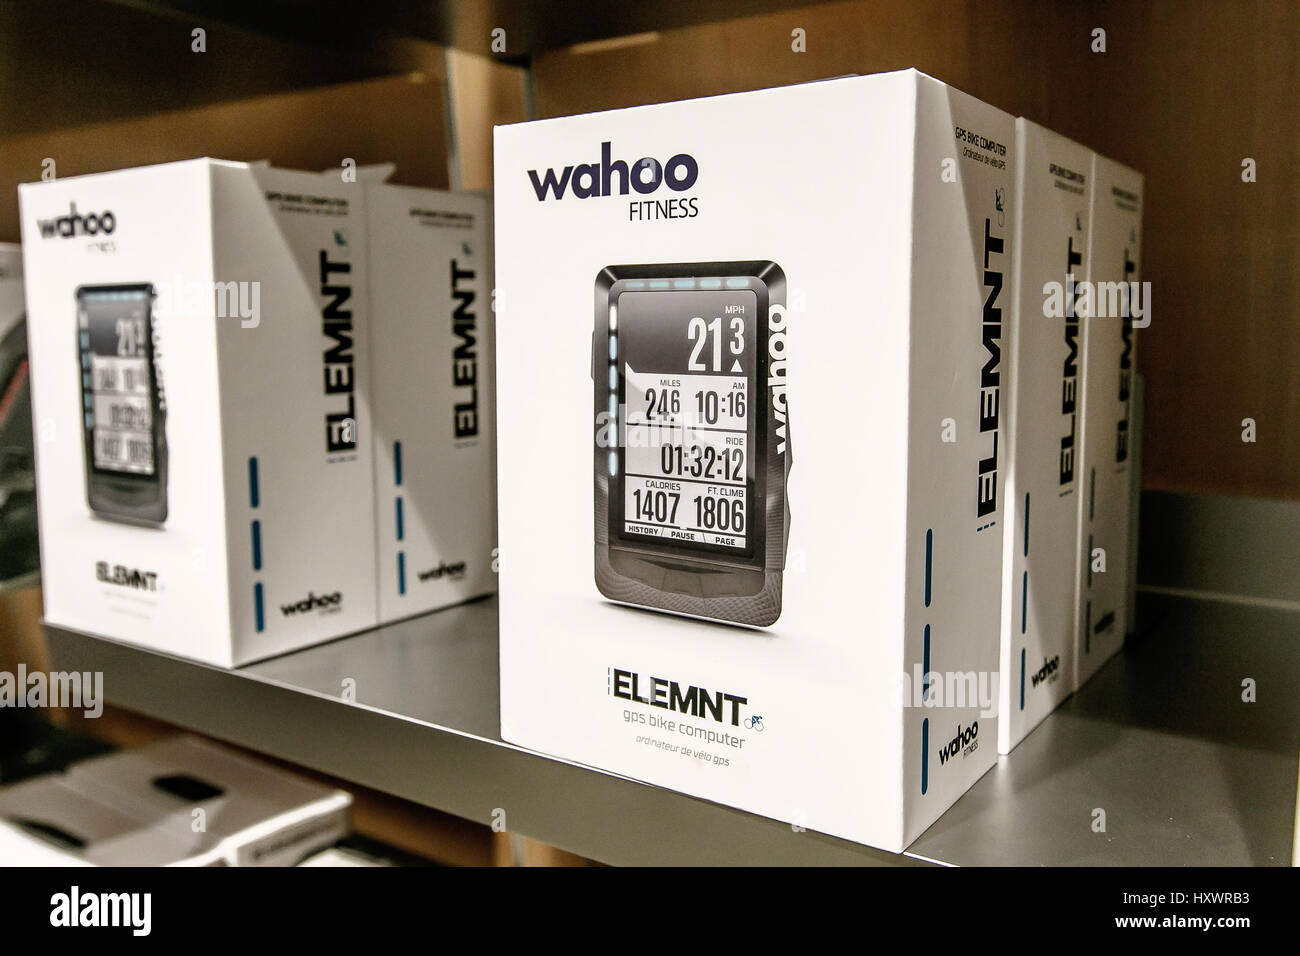 ELEMNT GPS Bike Computer by Wahoo Fitness is offered for sale in an Apple store. Stock Photo